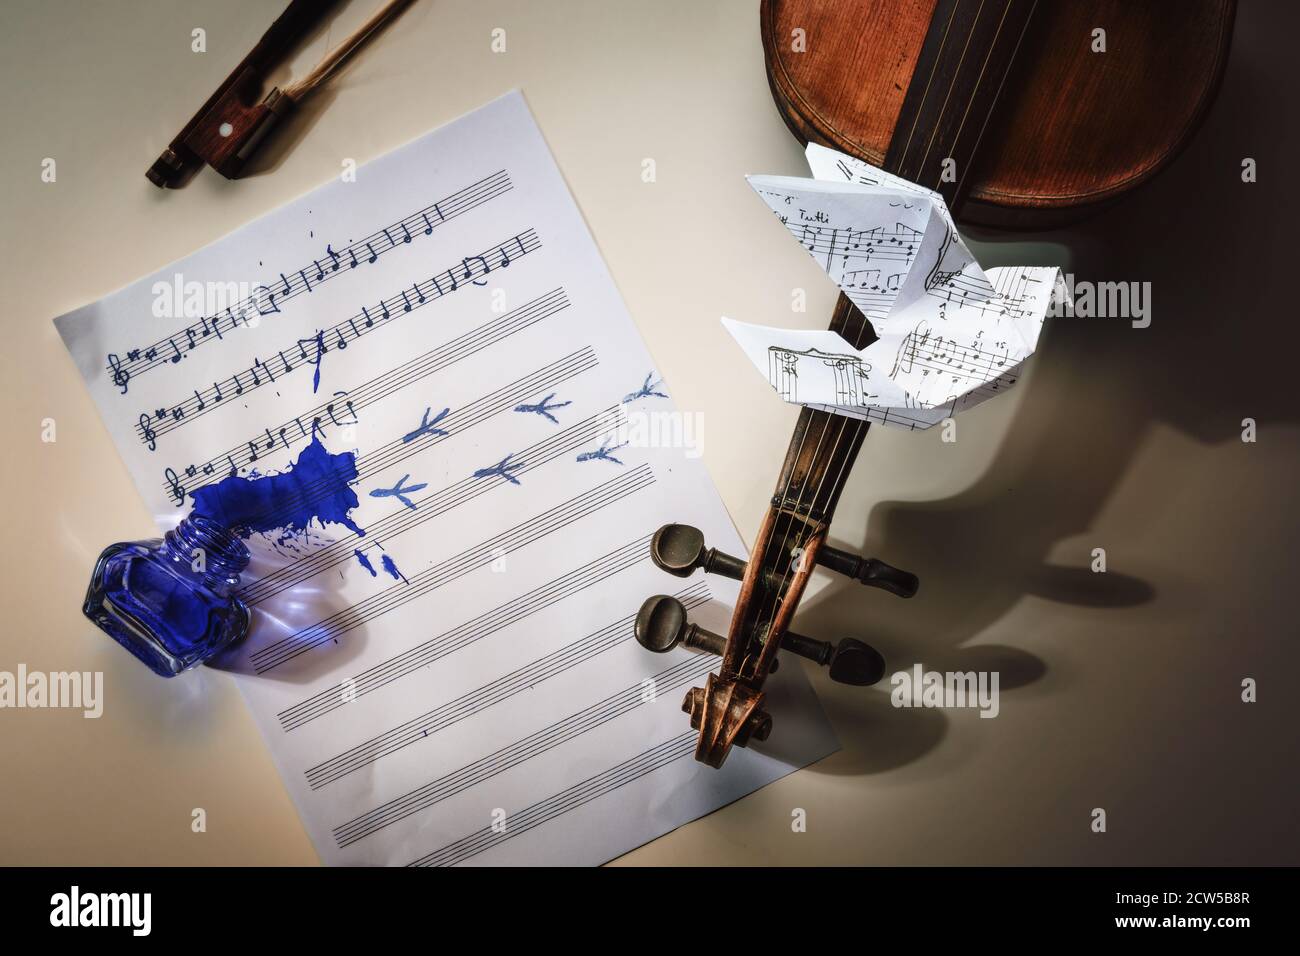 Violin and a sheet of music with started handwritten song All the birds are already here, overturned ink jar, bird footprints and an origami dove flyi Stock Photo